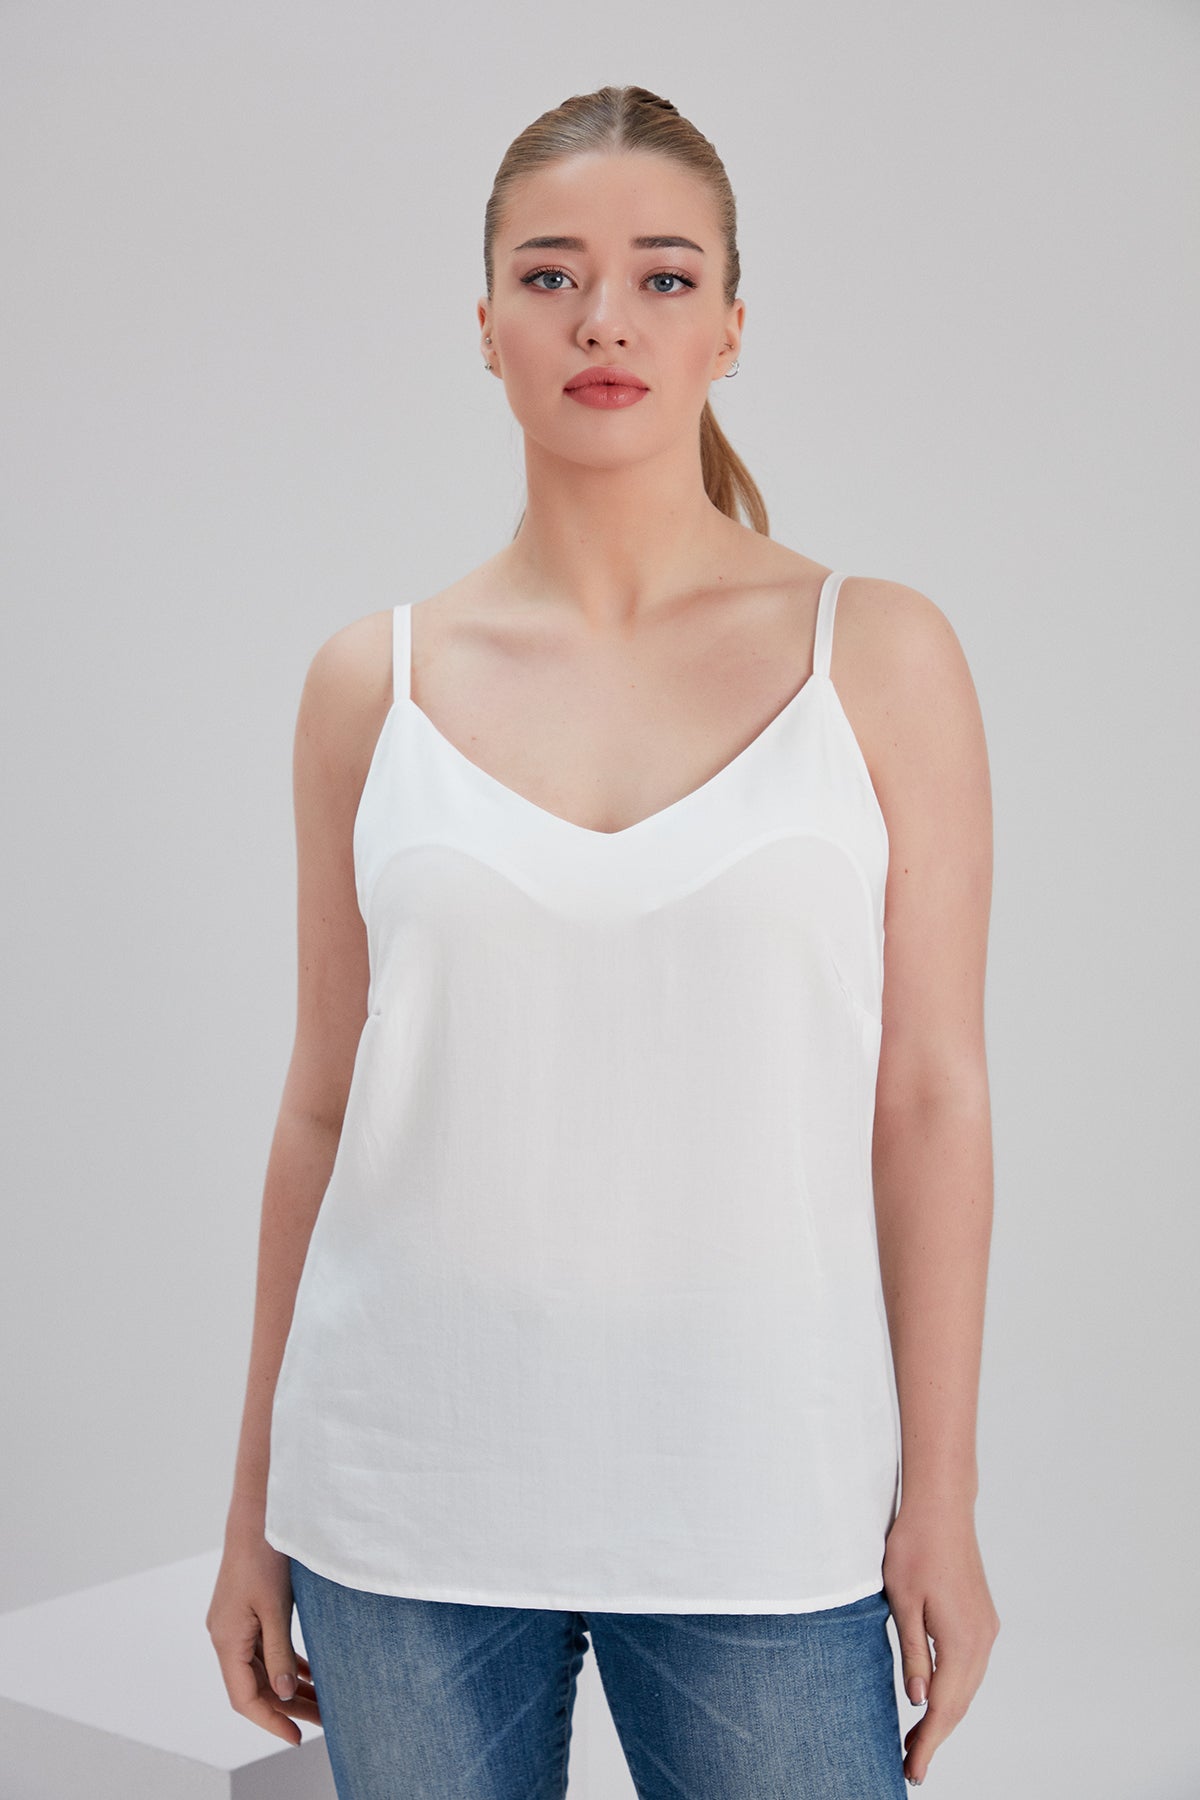 noacode sustainable tencel white sleeveless top with denim for size inclusive plus and tall fashion